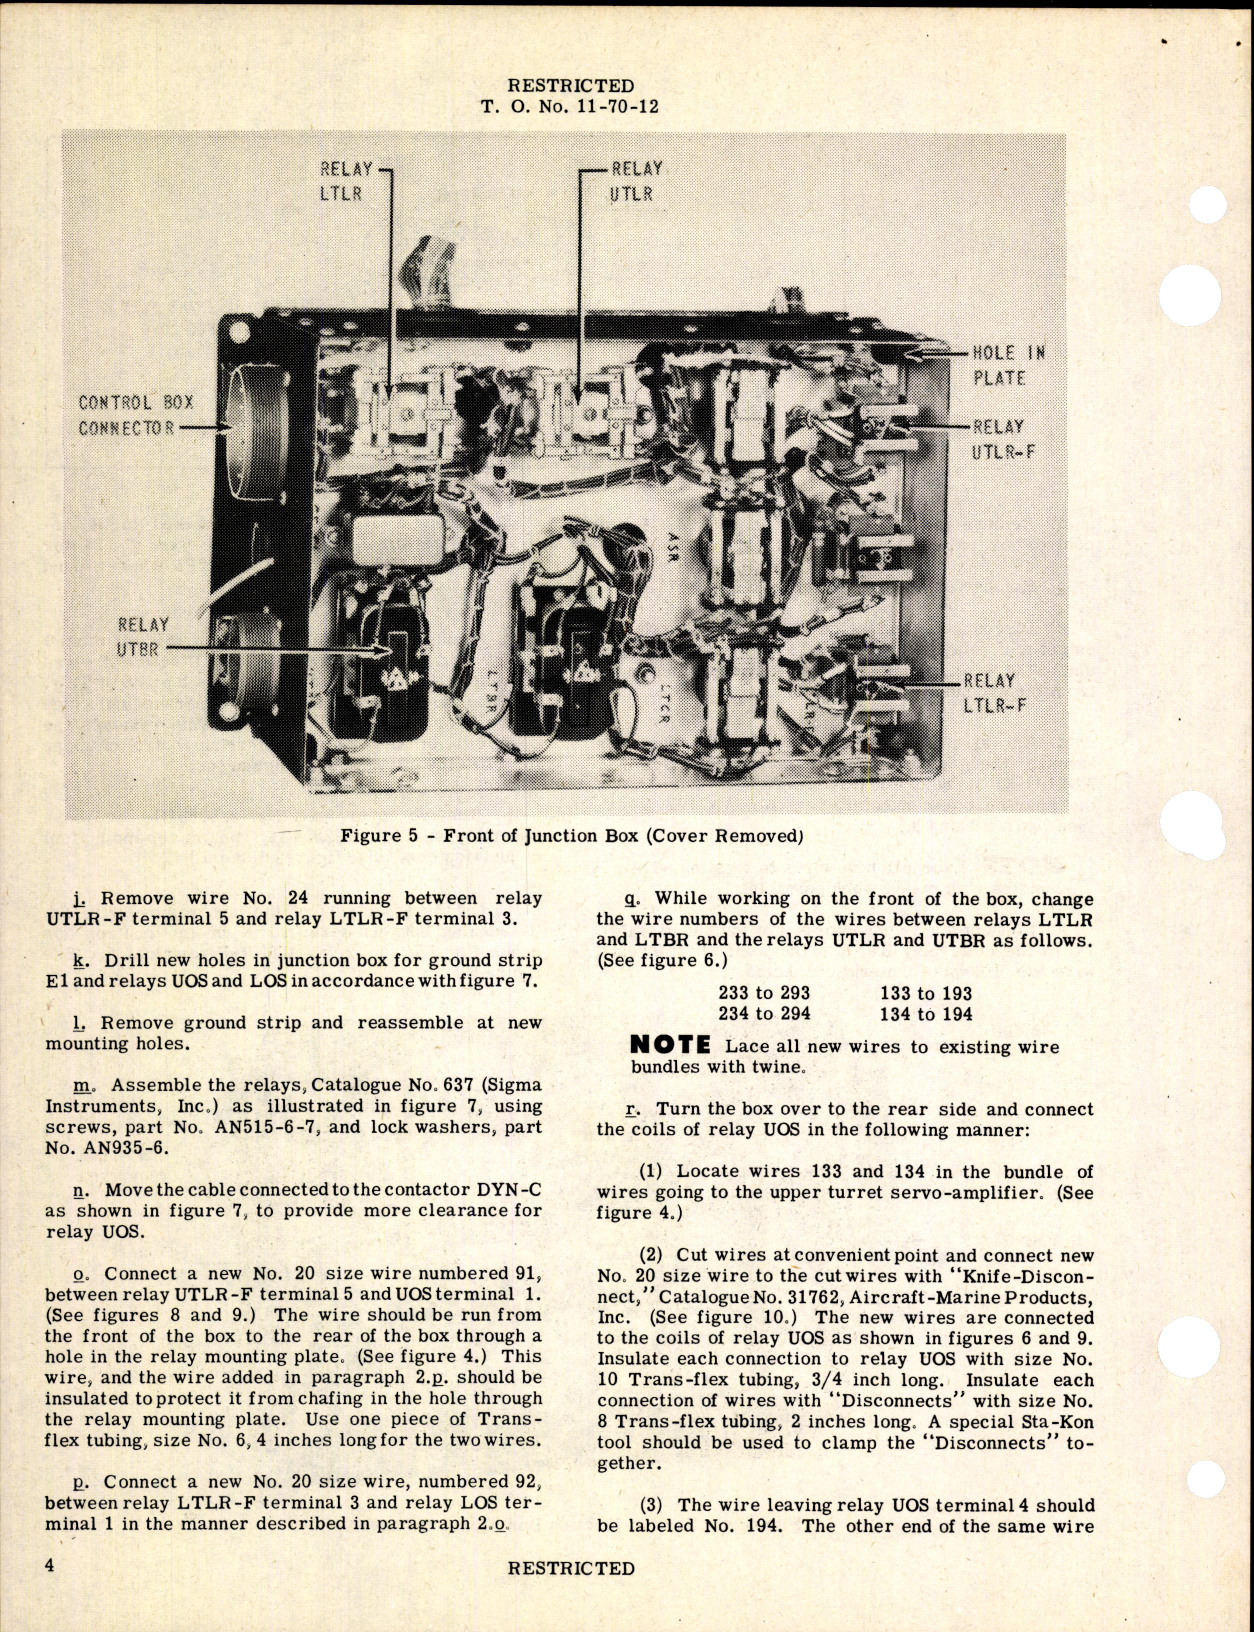 Sample page 4 from AirCorps Library document: Installation of Out of Synchronism Relays